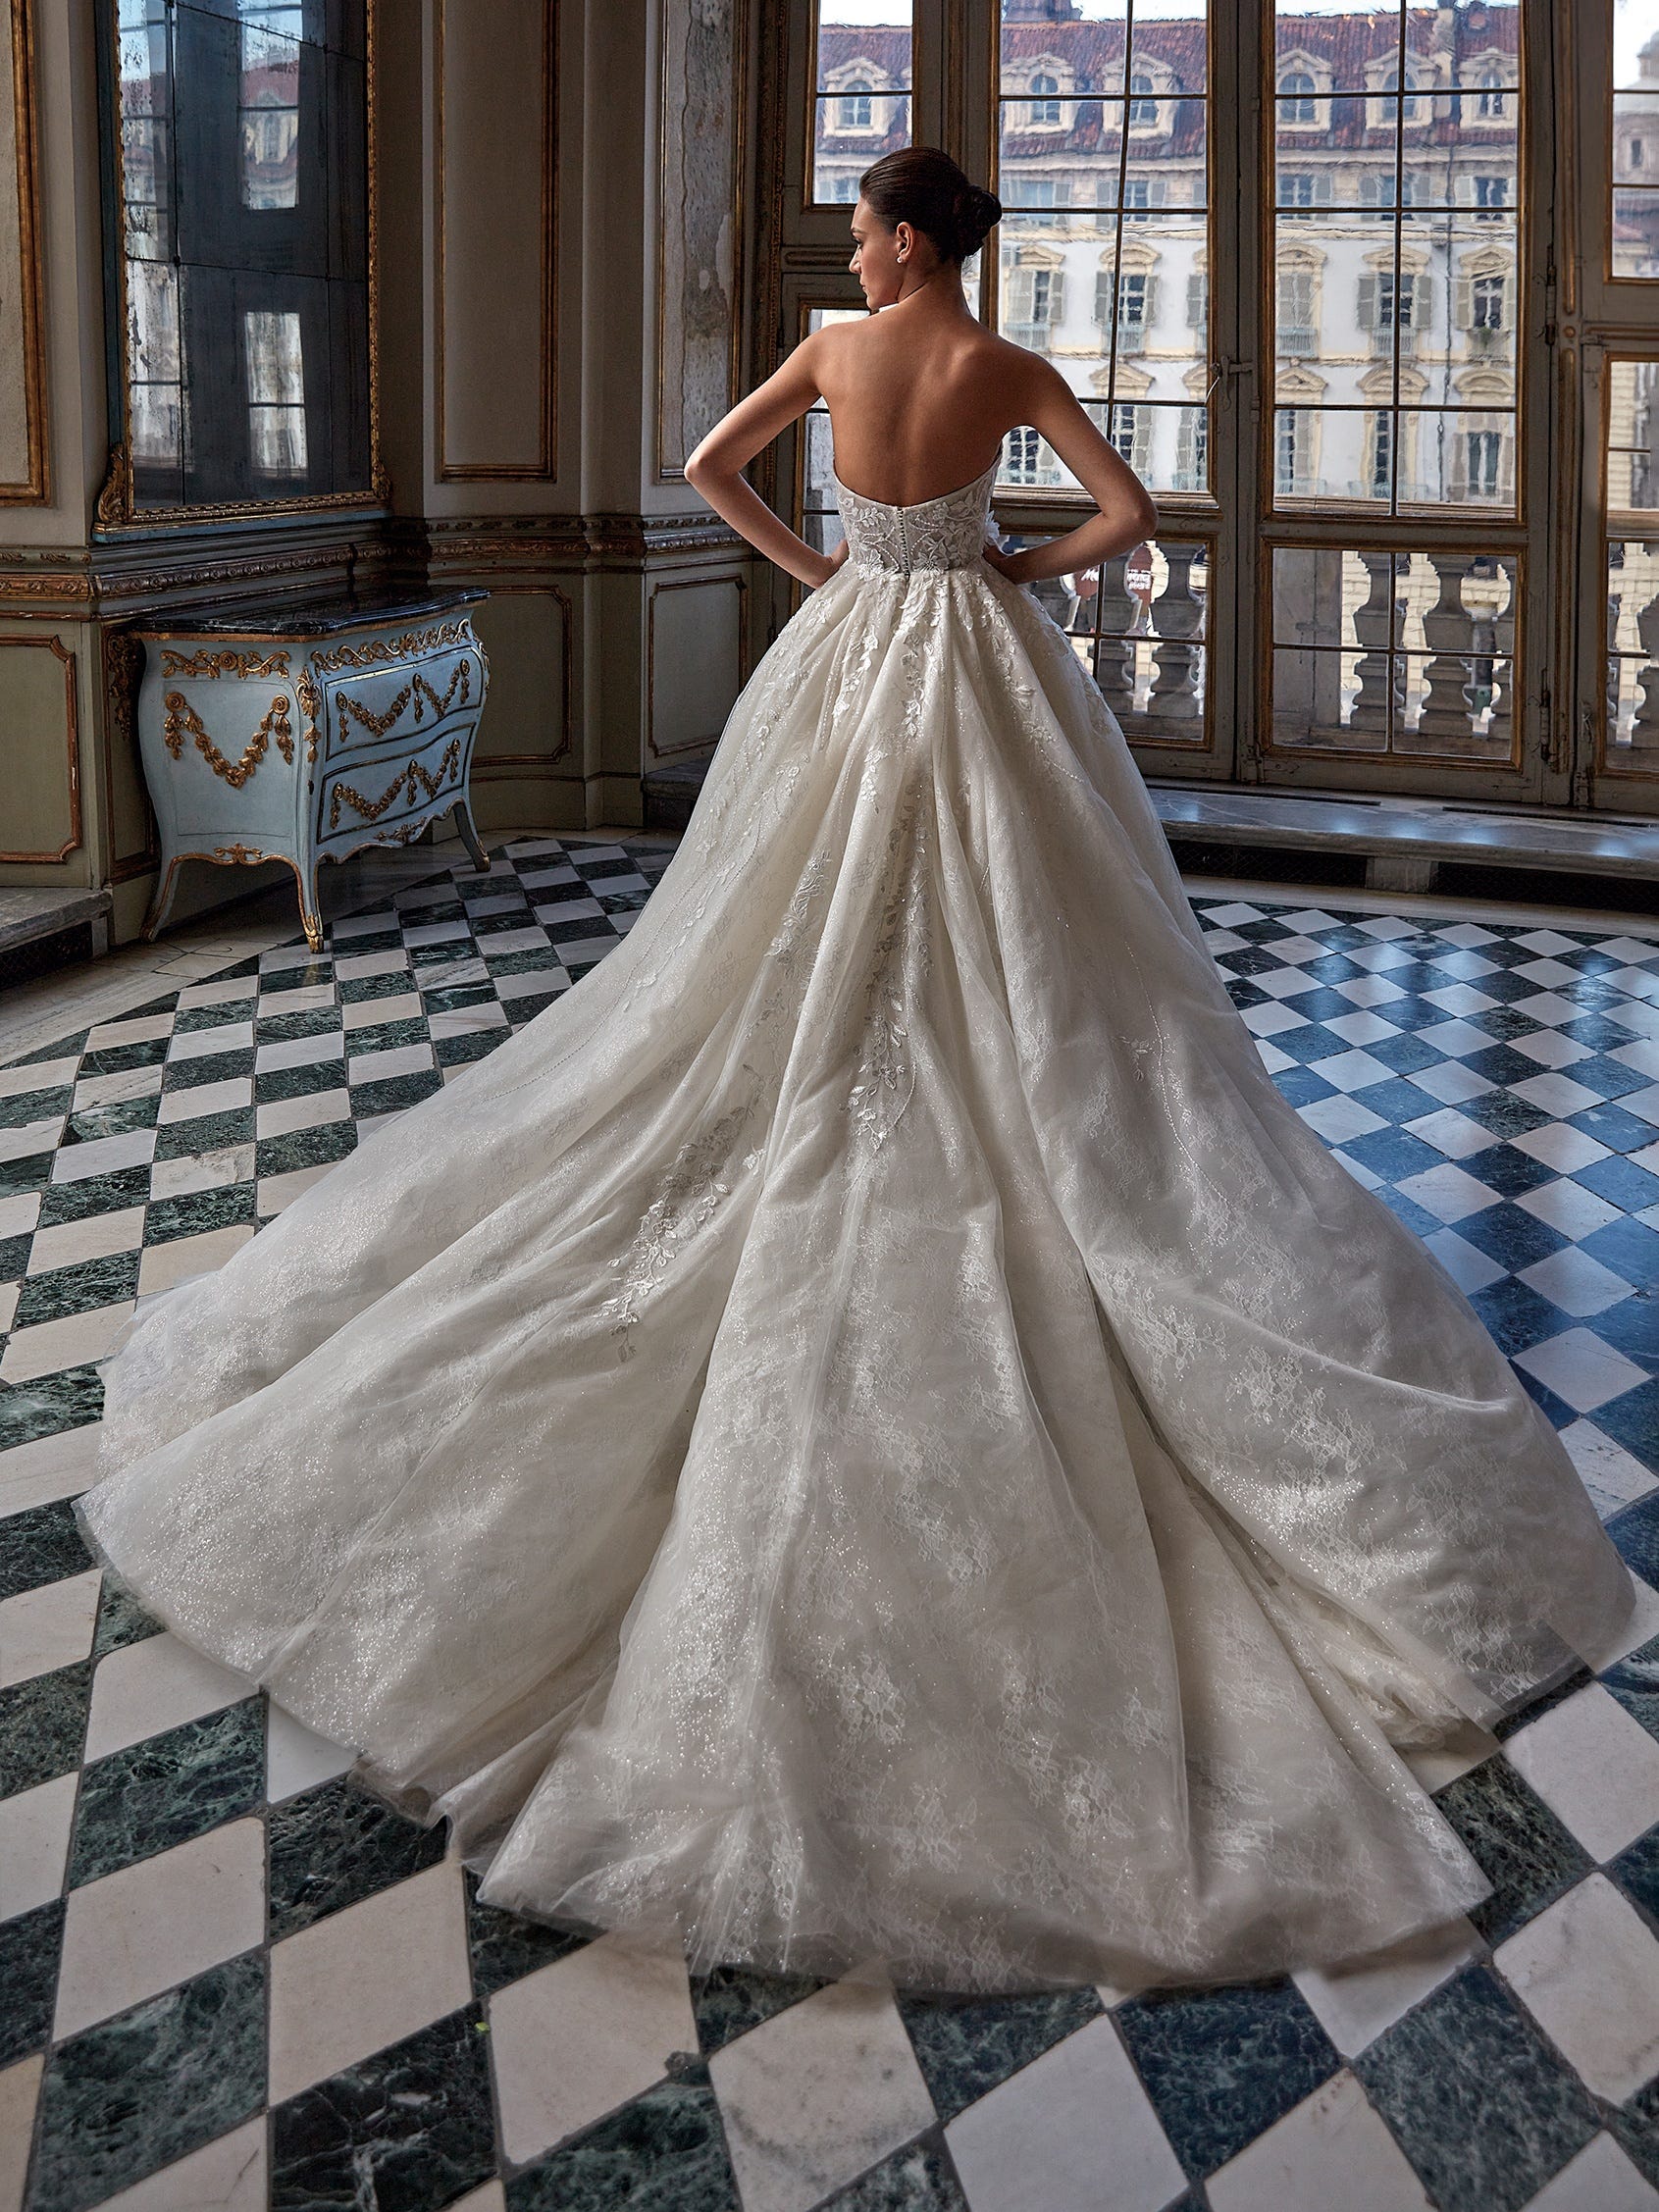 Dreamy Ball Gown Wedding Dresses for Your Fairytale Celebration